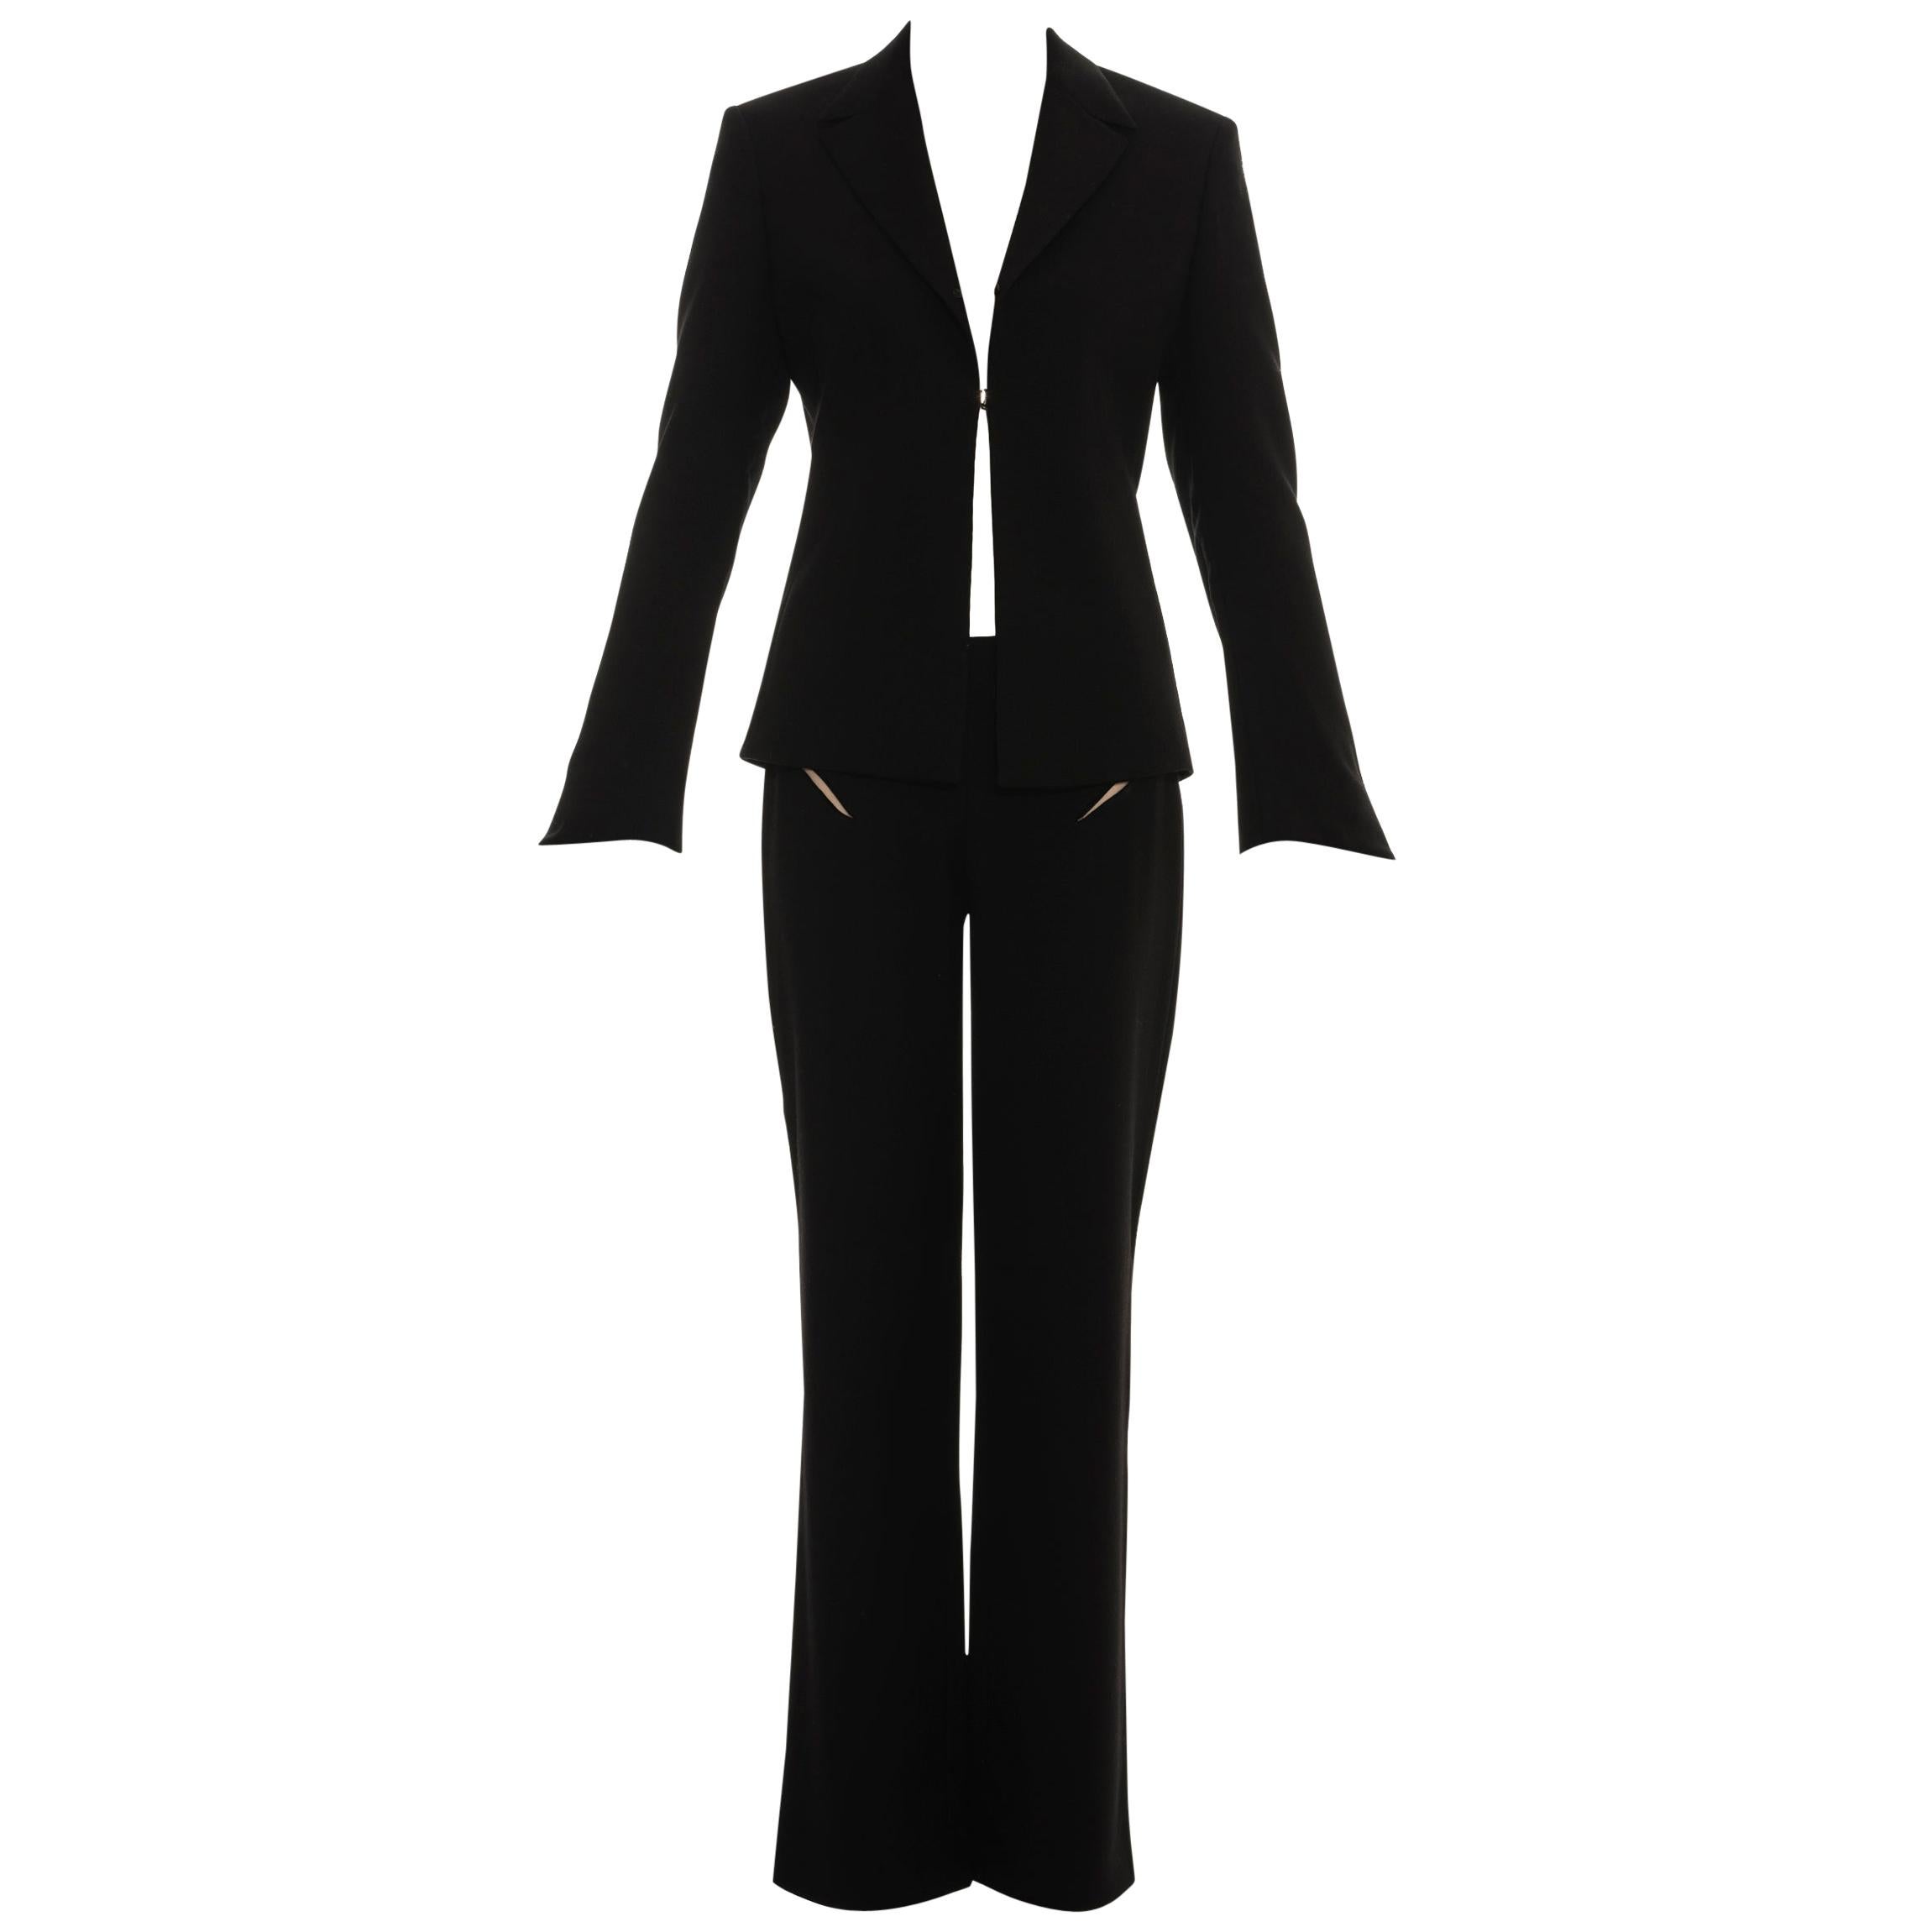 Gianni Versace black wool pant suit with mesh inserts, ss 1998